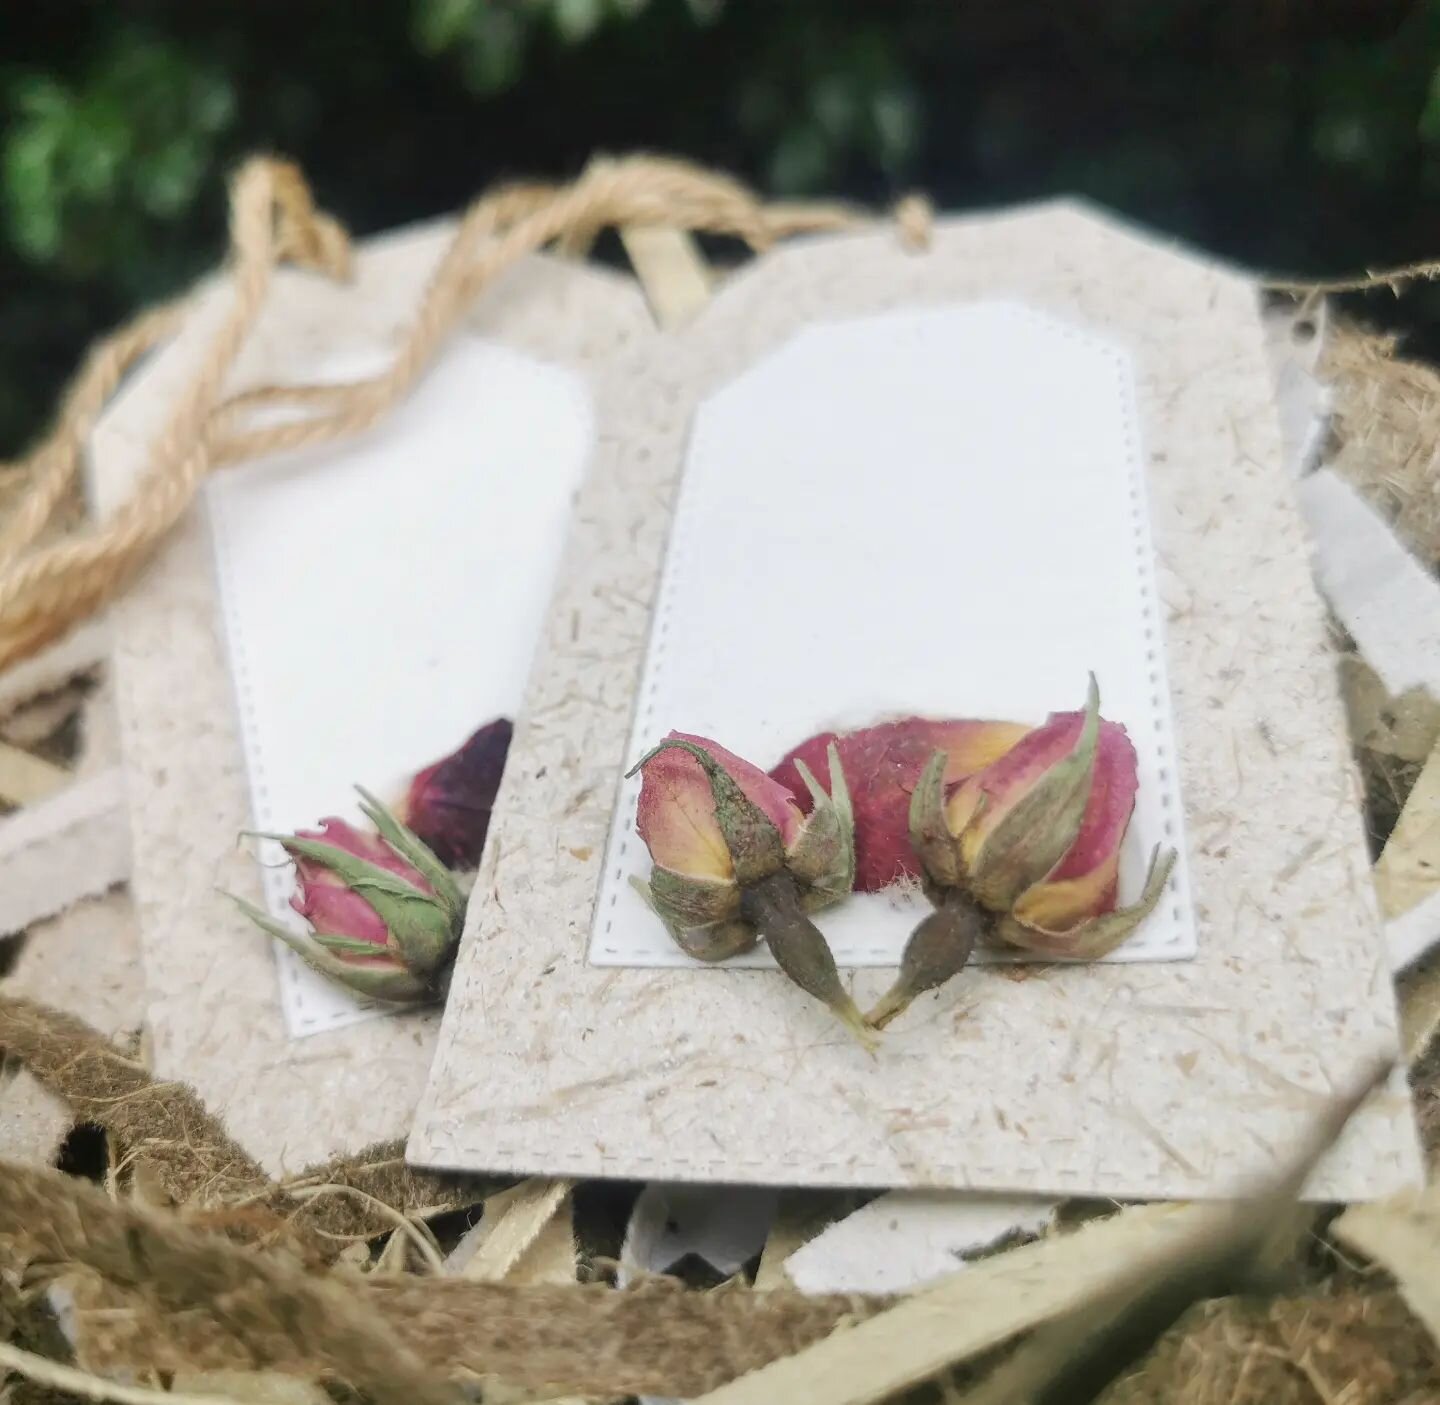 A couple of Rose Oversized Floral Tags heading to their new home! These are new products that have helped me start developing my small batch, plant-based-waste collections. Looking forward to showing you more...
100% recycled: plant fibre paper from 